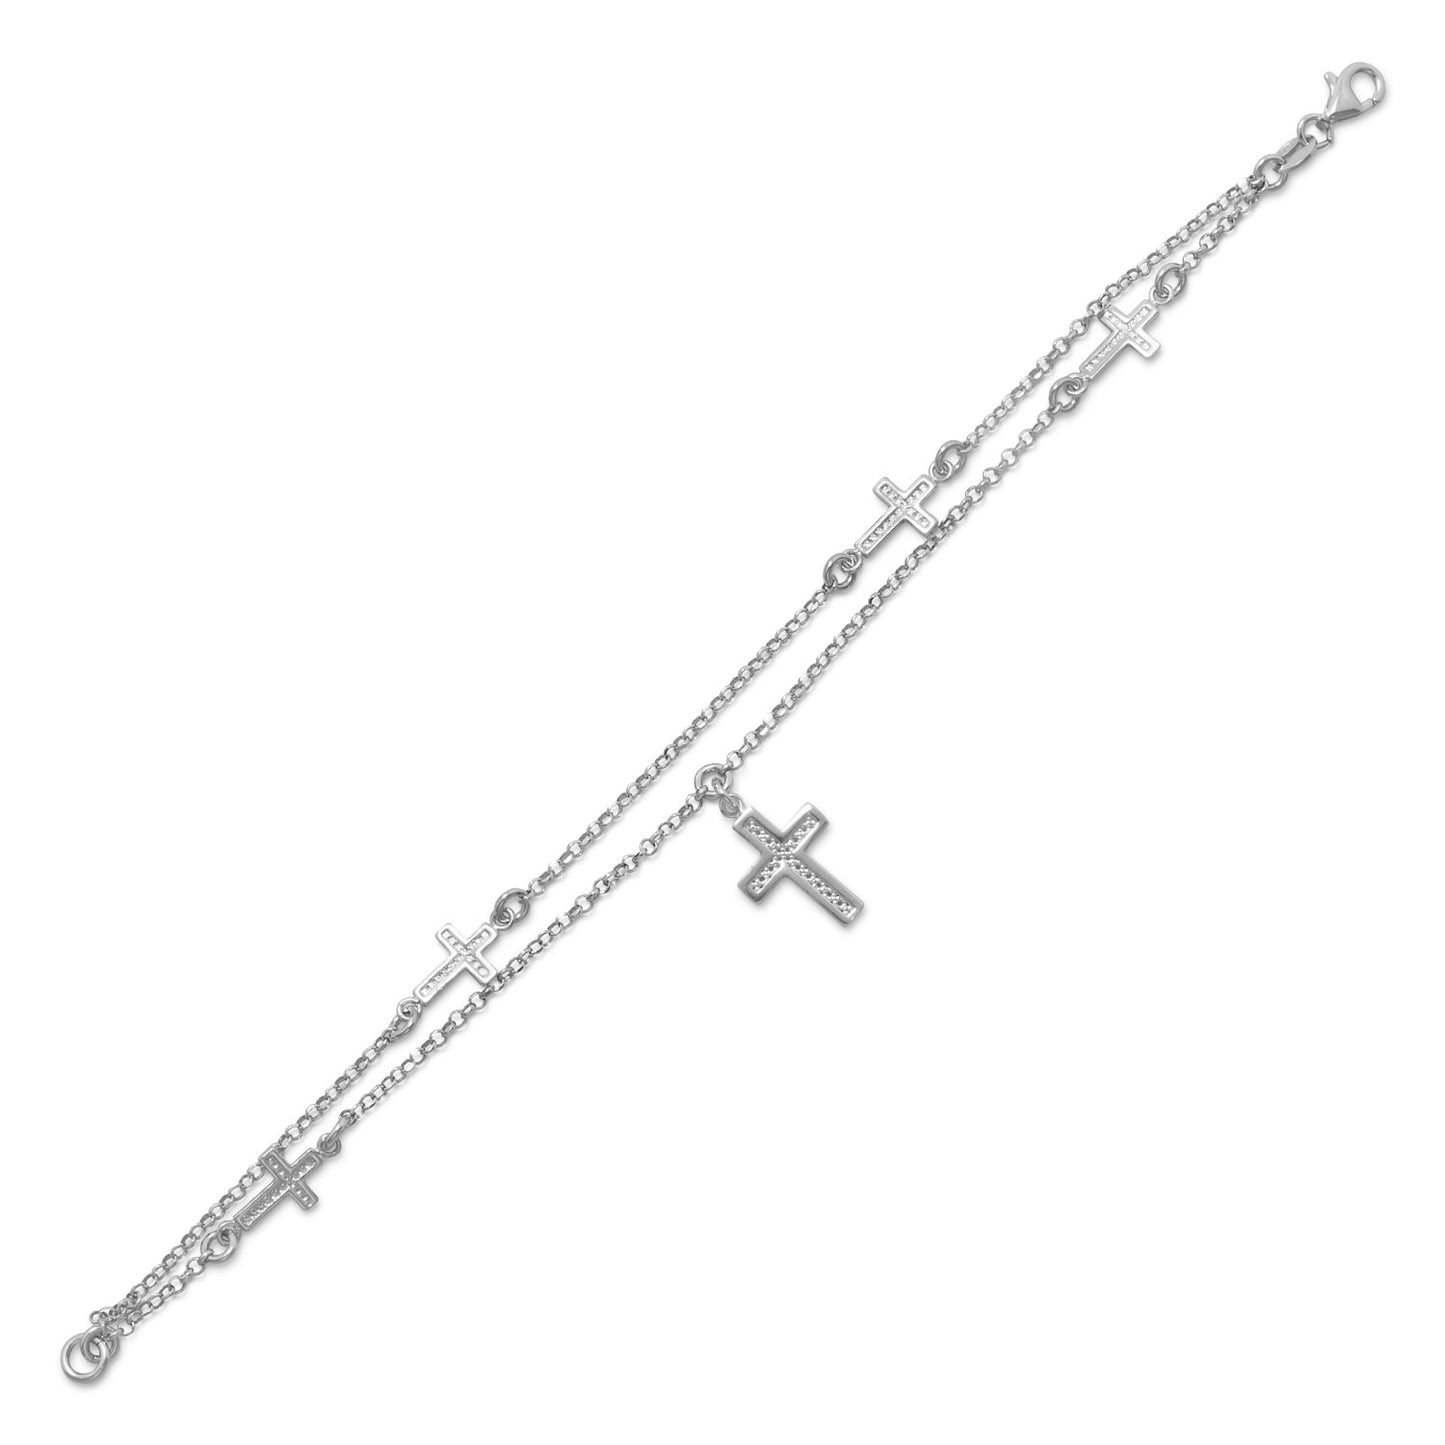 Rhodium Plated Sterling Silver Double Strand Cross Charm Bracelet